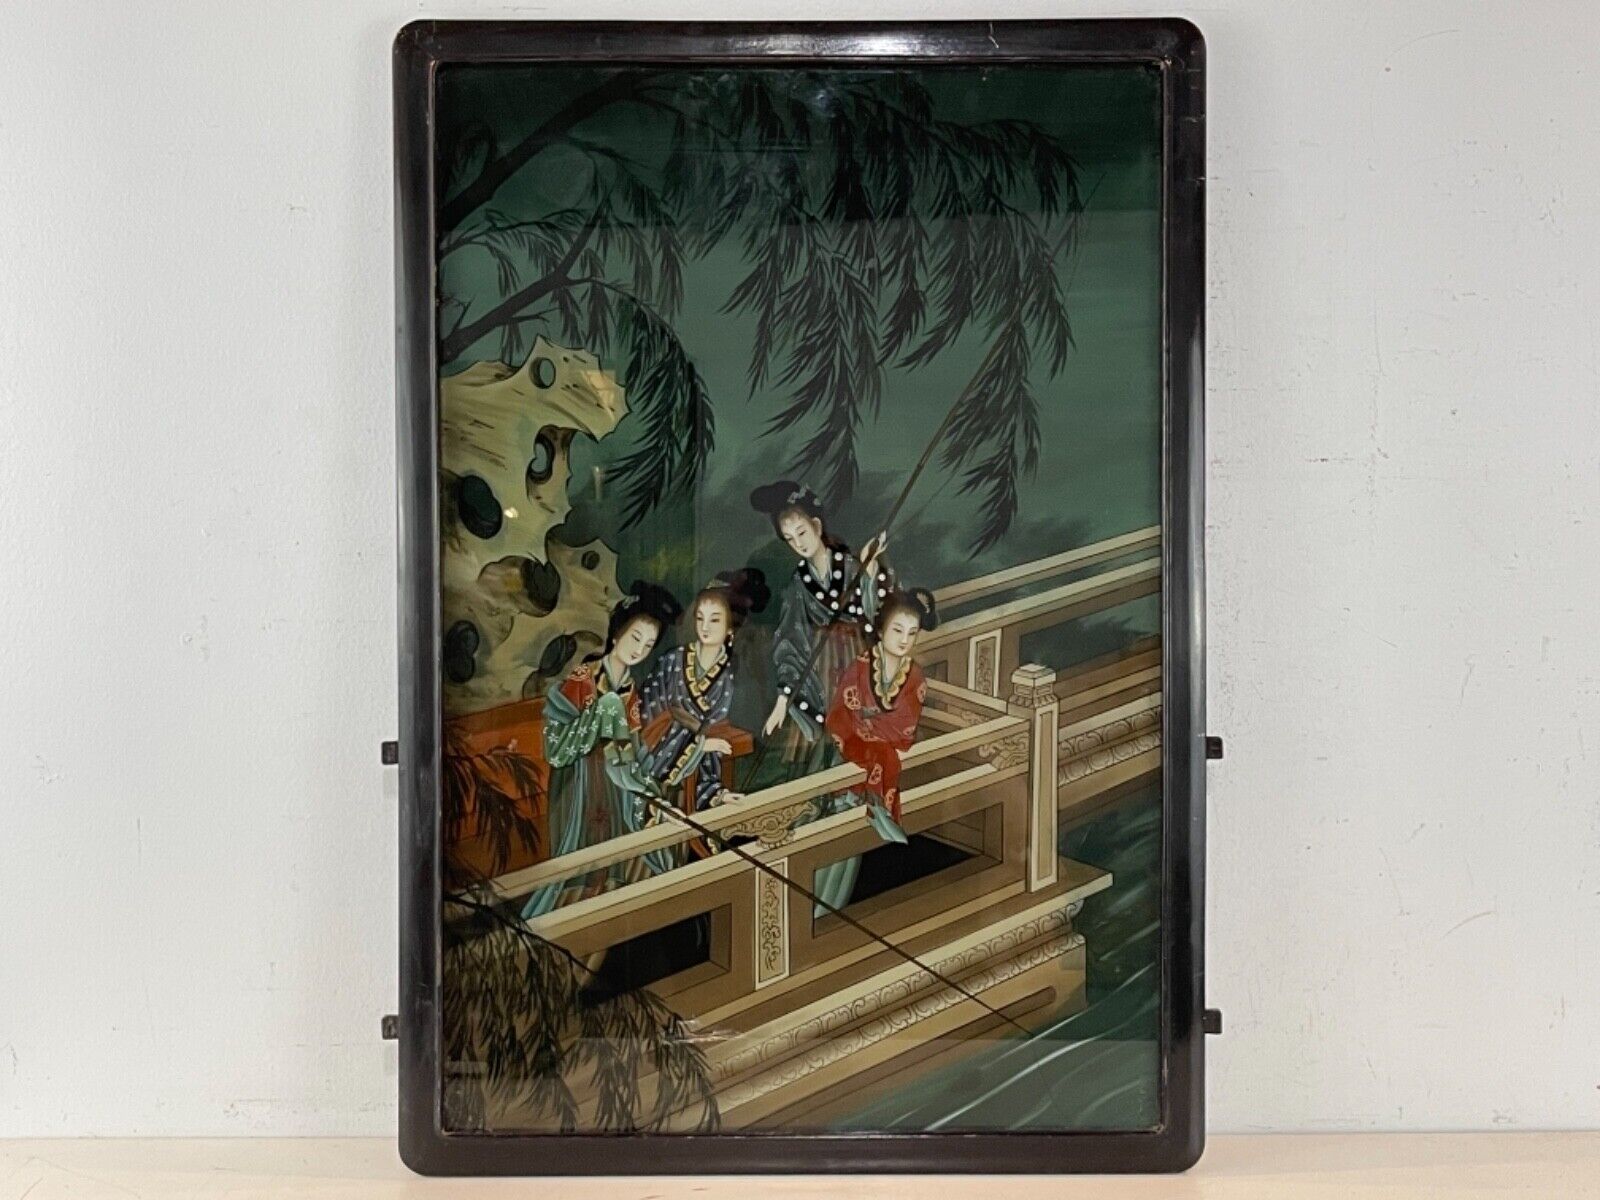 Vintage Likely Antique Chinese Reverse Glass Painting of a Woman Pole Fishing